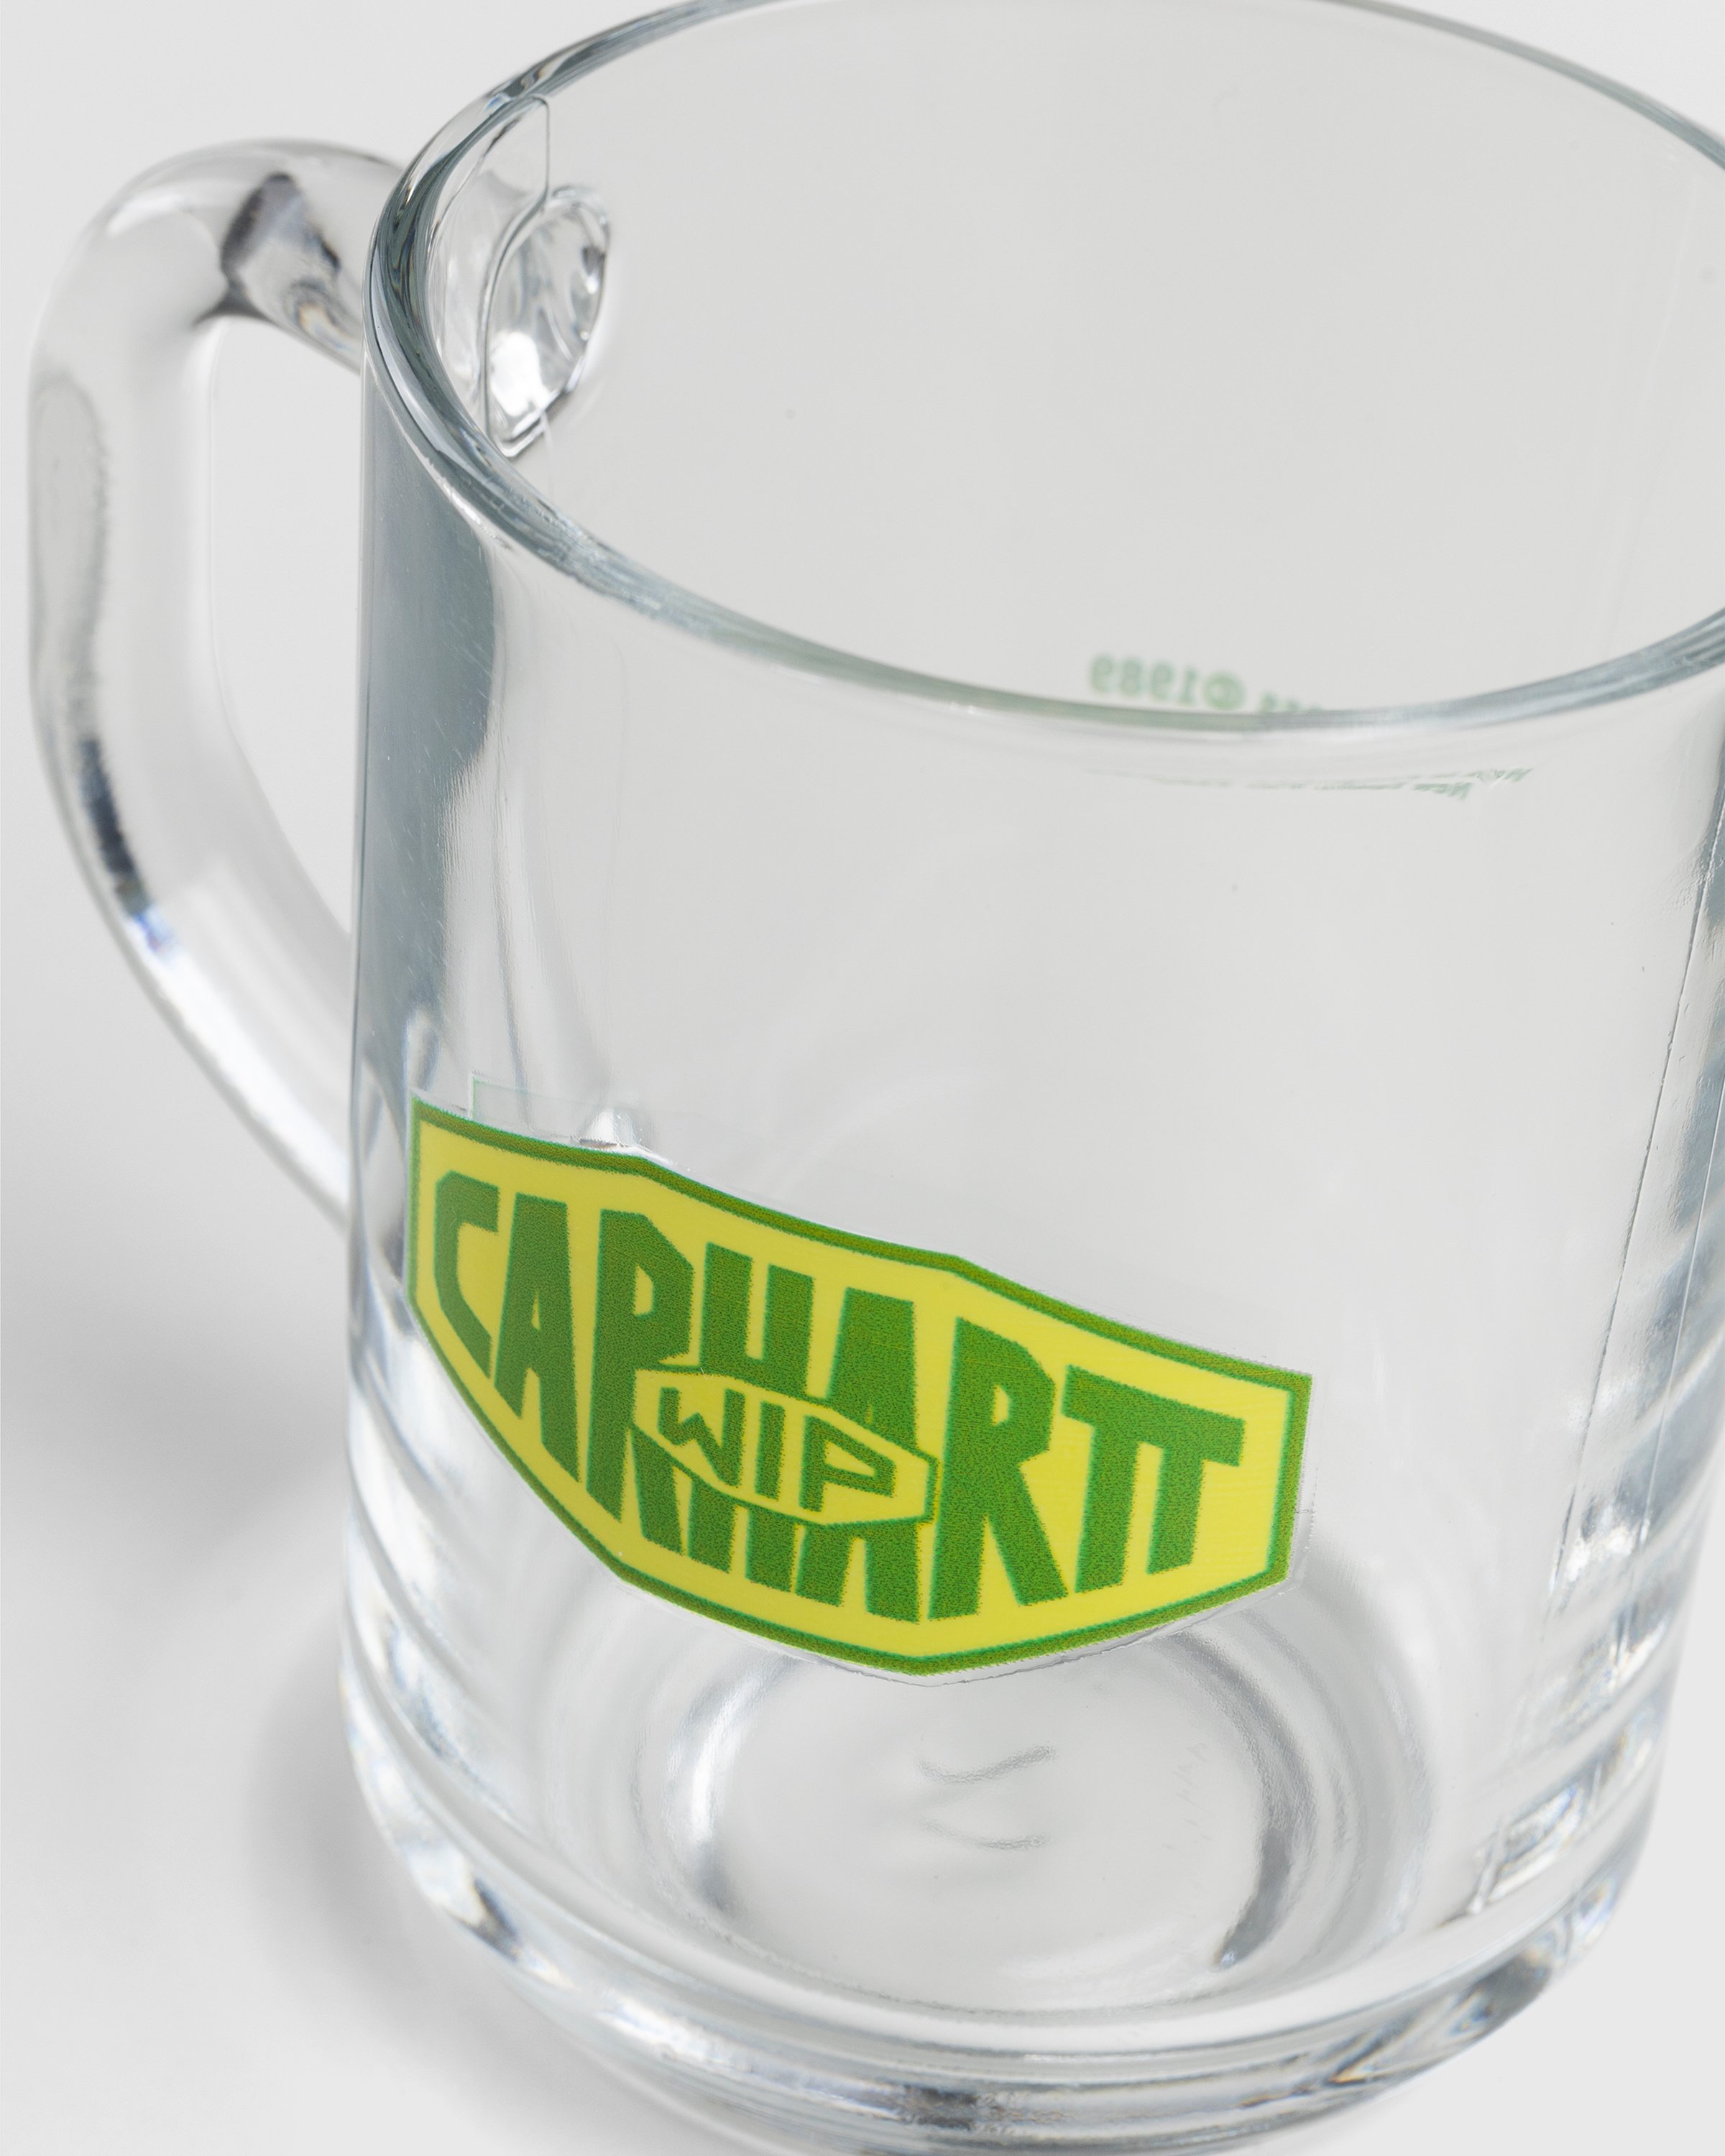 Carhartt WIP - New Tools Glass Mug Clear - Lifestyle - Clear - Image 3